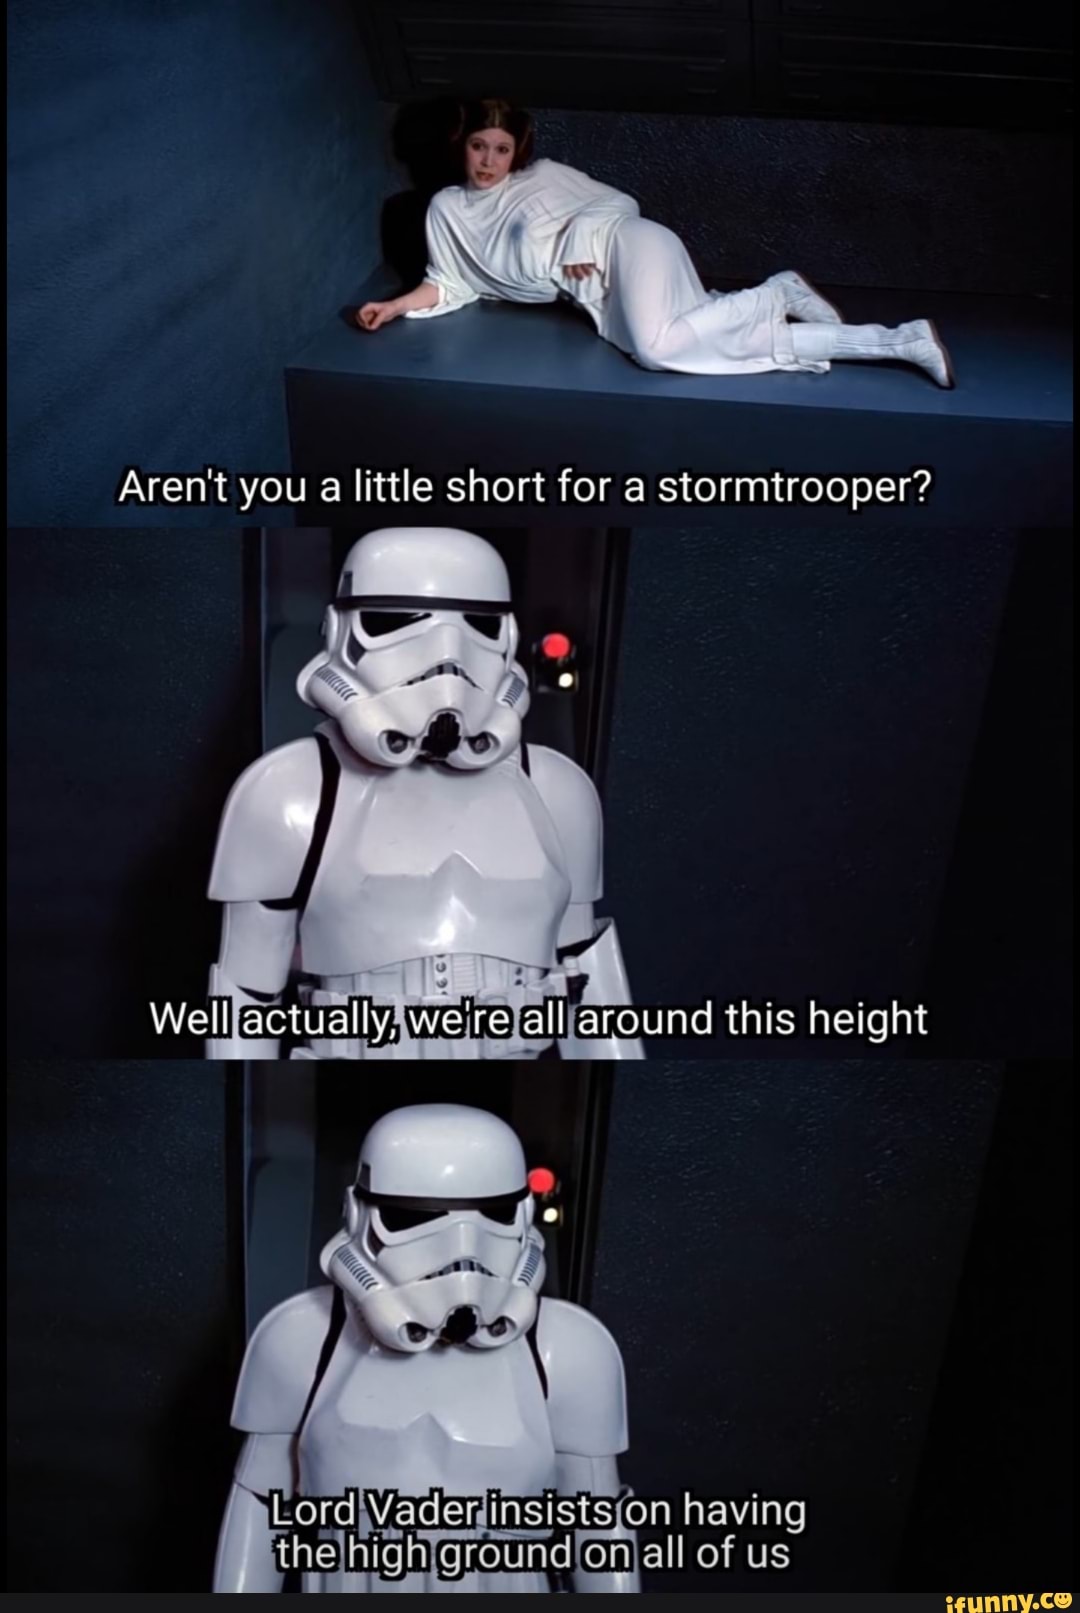 Aren T You A Little Short For A Stormtrooper L6rd Ader Insists Bn Having Th E High Groundgmall Of Us Ifunny